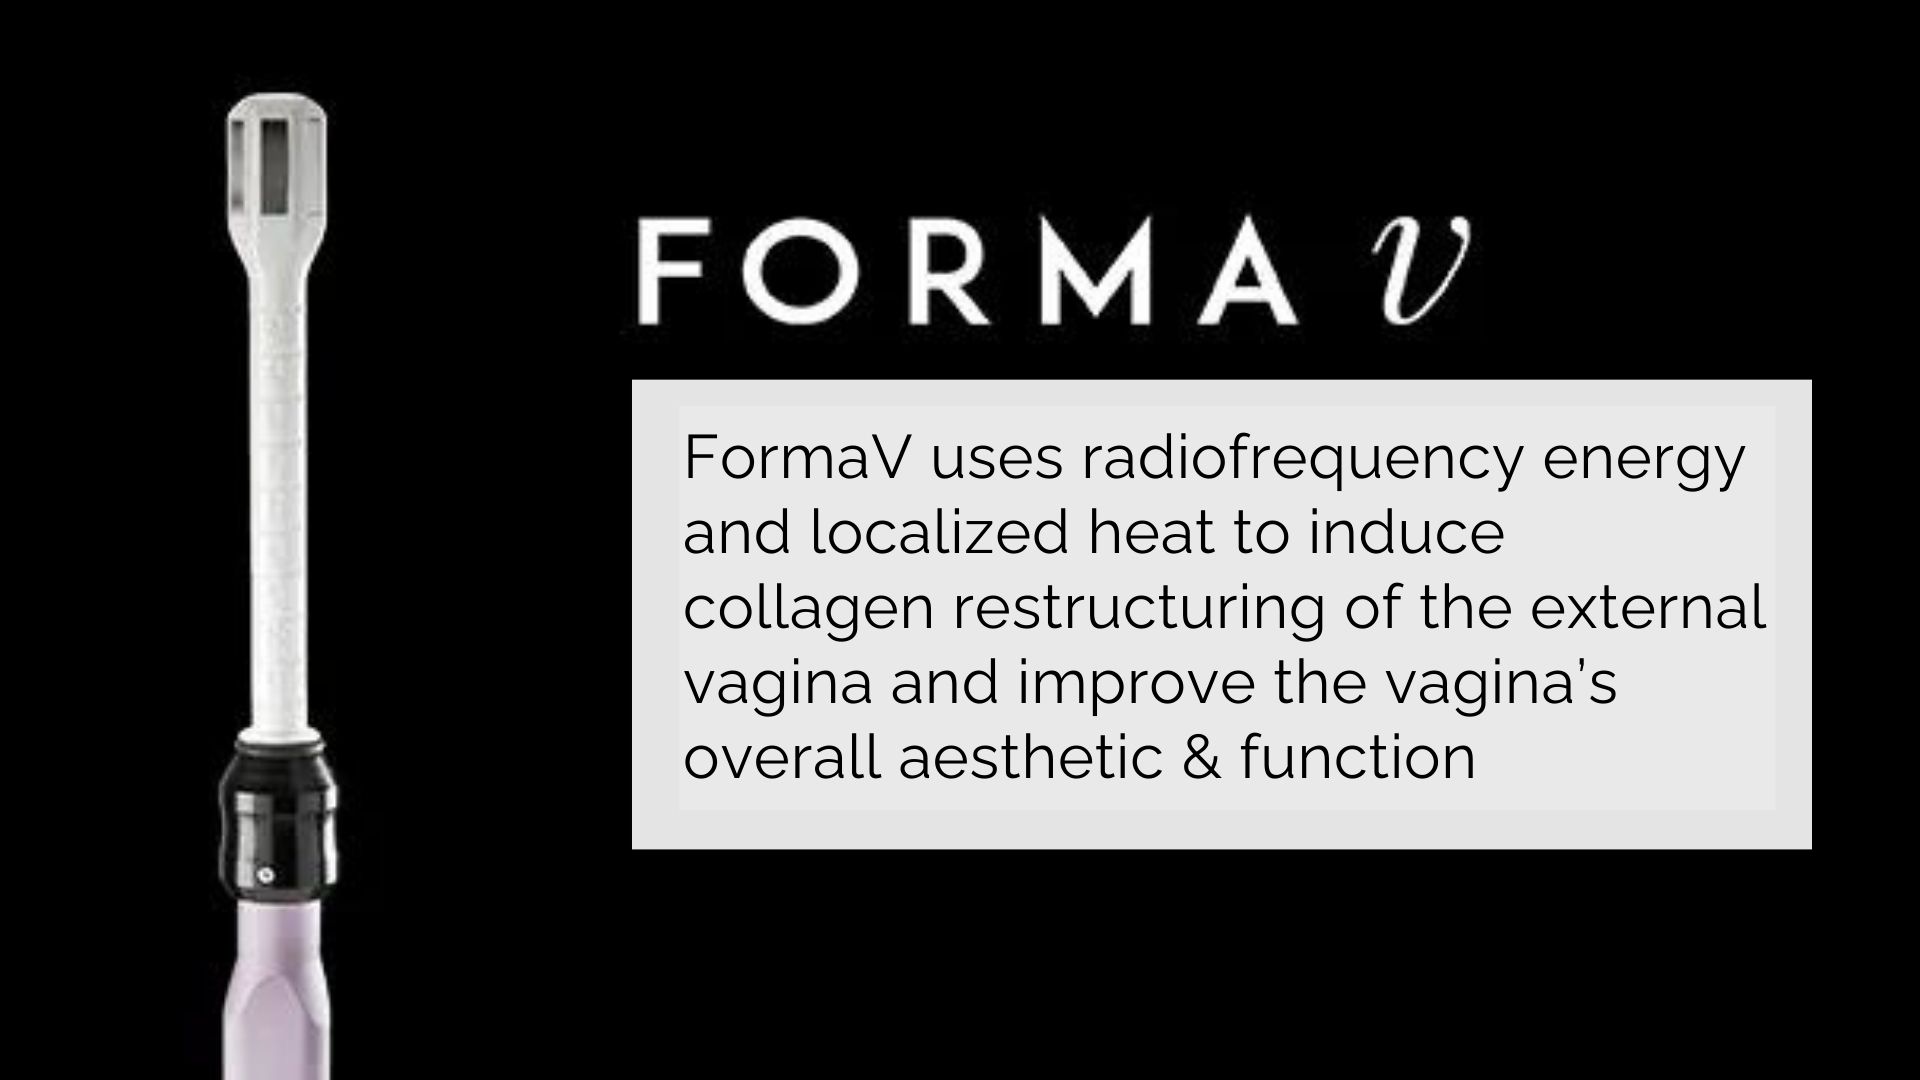 FormaV can help treat vaginal laxity that is often seen as a result of aging, childbirth, genetics, and more. Vaginal rejuvenation with FormaV is an innovative procedure designed for feminine wellness that can improve a woman’s overall self-esteem but also correct vaginal pain, sensitivity, urinary incontinence, or discomfort.